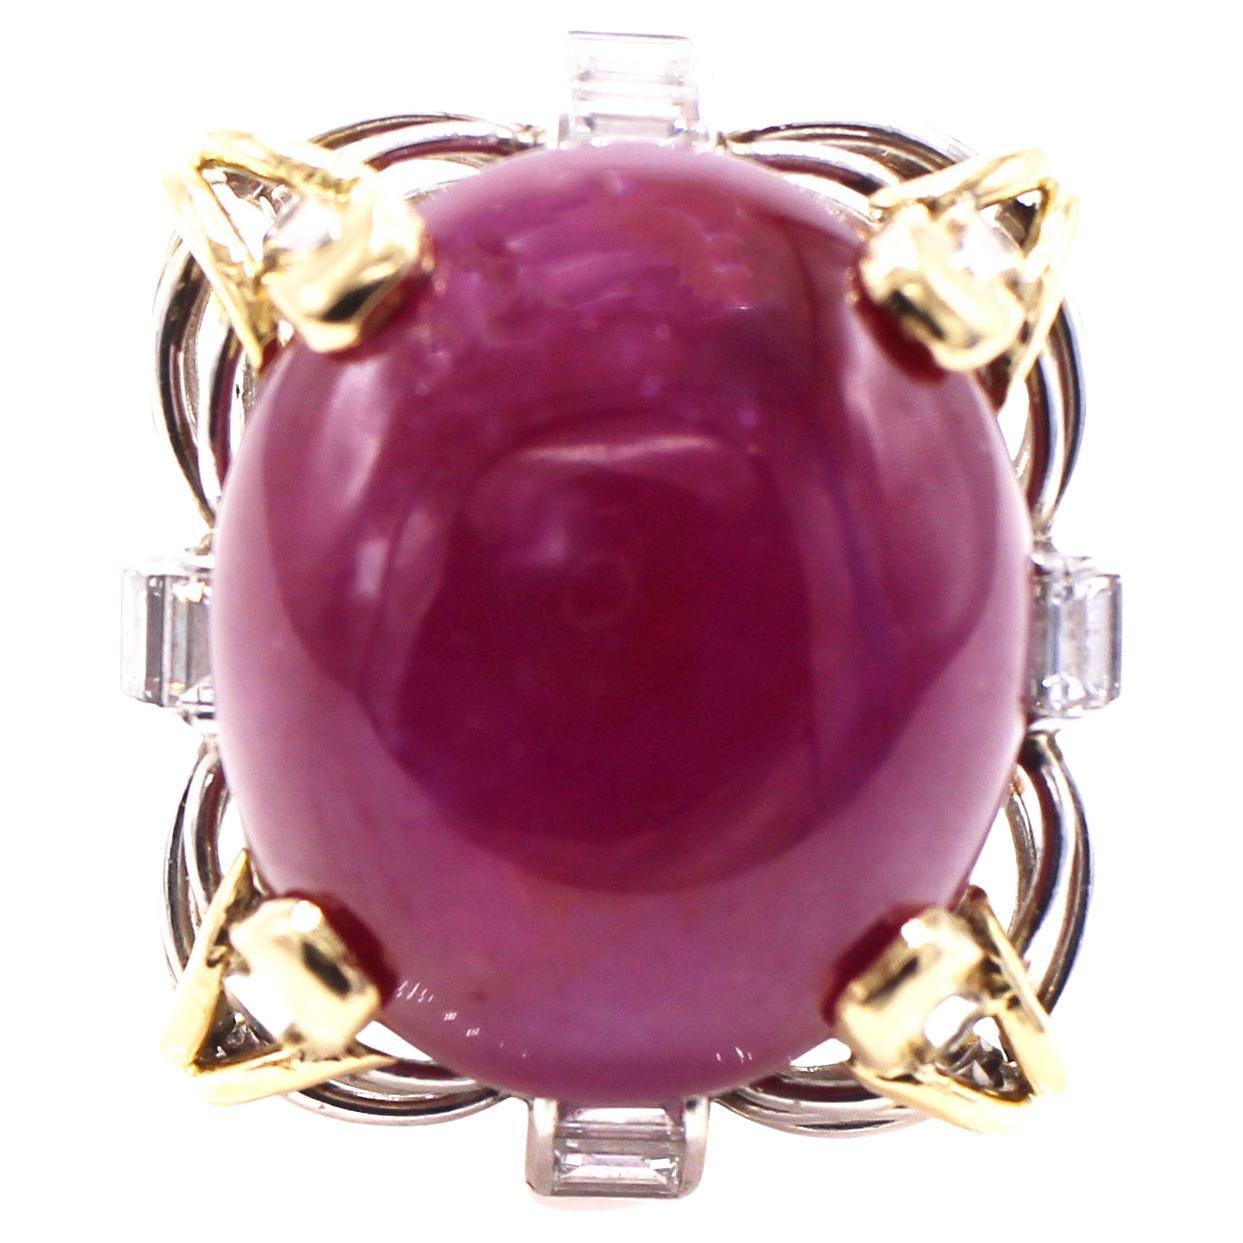 Beautifully designed and masterfully handcrafted Retro ruby and diamond ring from ca 1945, crafted in platinum and 18 karat yellow gold. The center piece of this ring is a large cabochon ruby weighing 34.68 carats held by 4 yellow gold and platinum